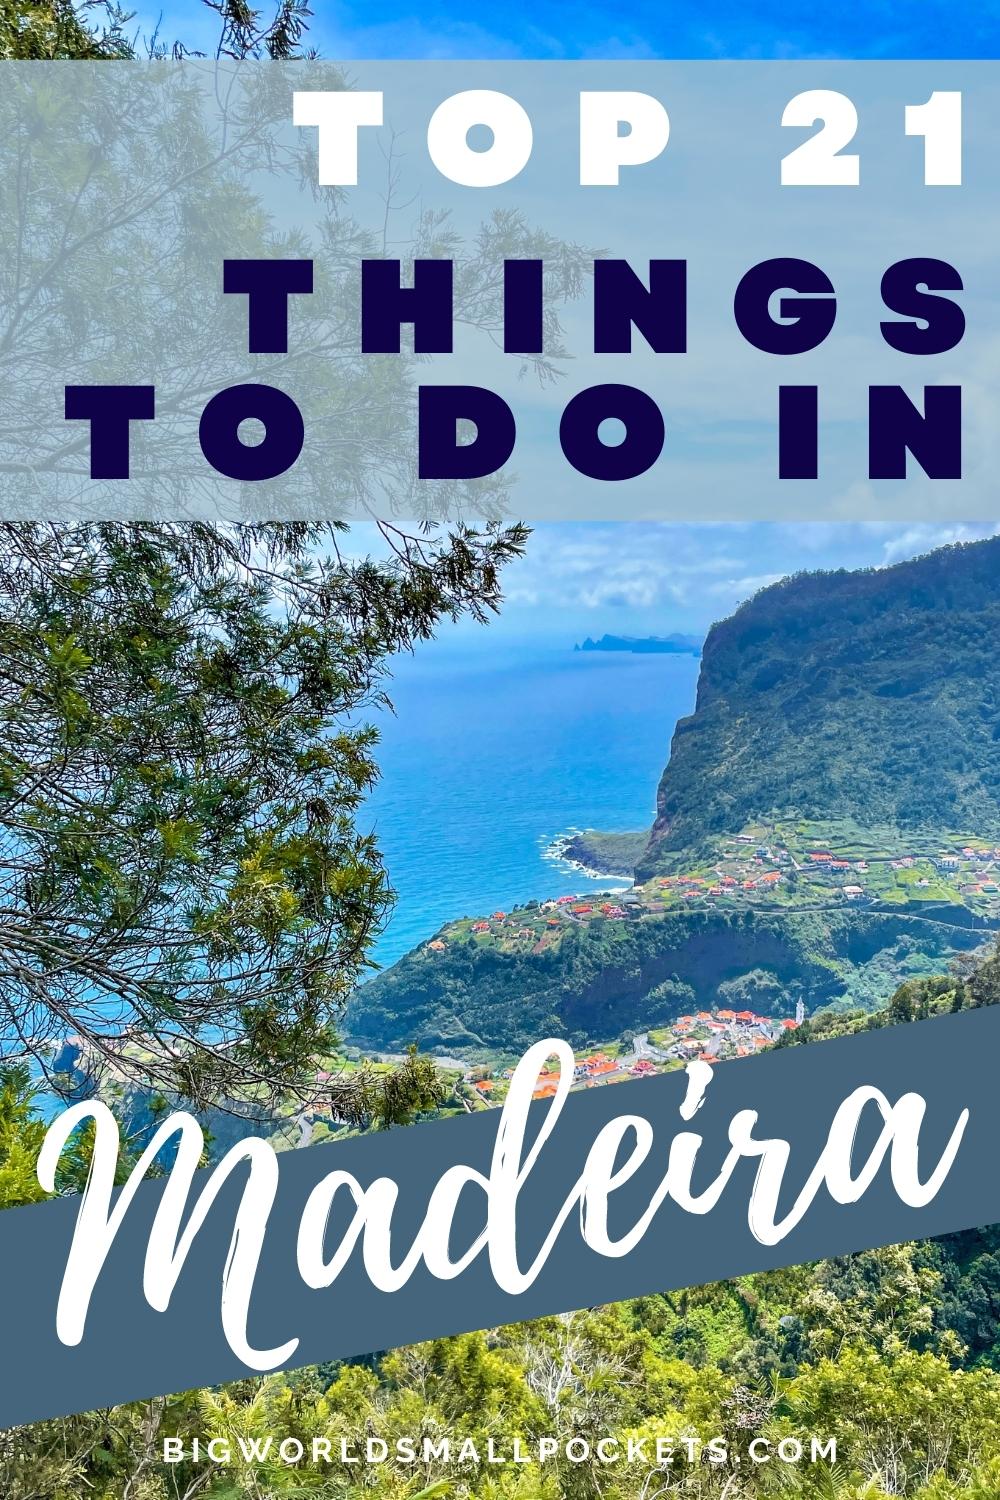 Top 21 Things to Do in Madeira